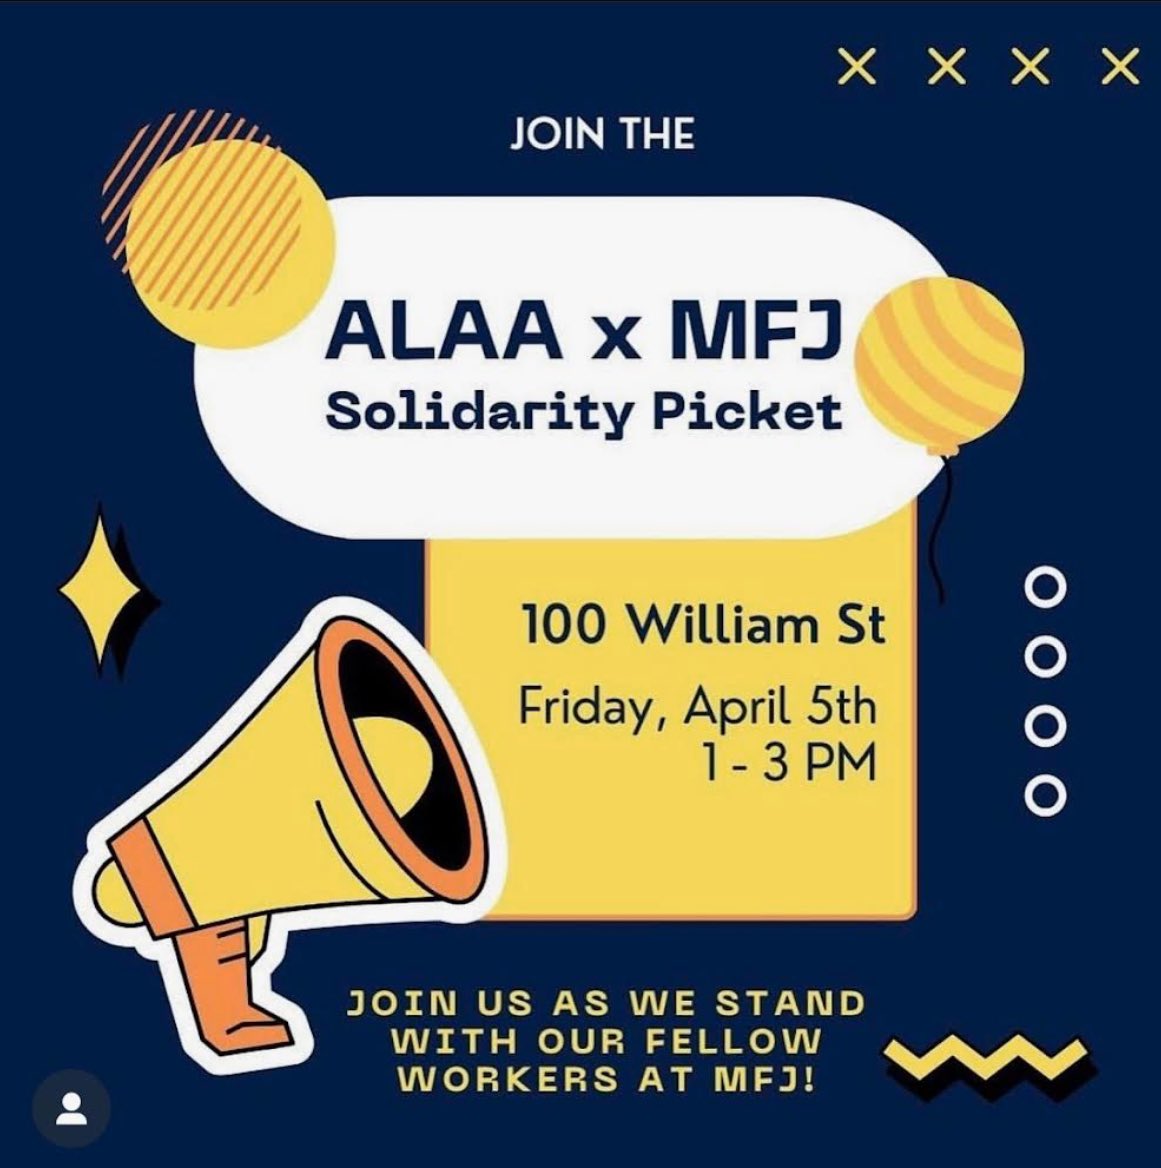 Those in the NYC area, come out today (Friday, 4/5 at 1-3pm) in solidarity to this @alaa2325 solidarity picket for our @mfjunion siblings! 🙌😊✊ #mfjonstrike #solidarityforever